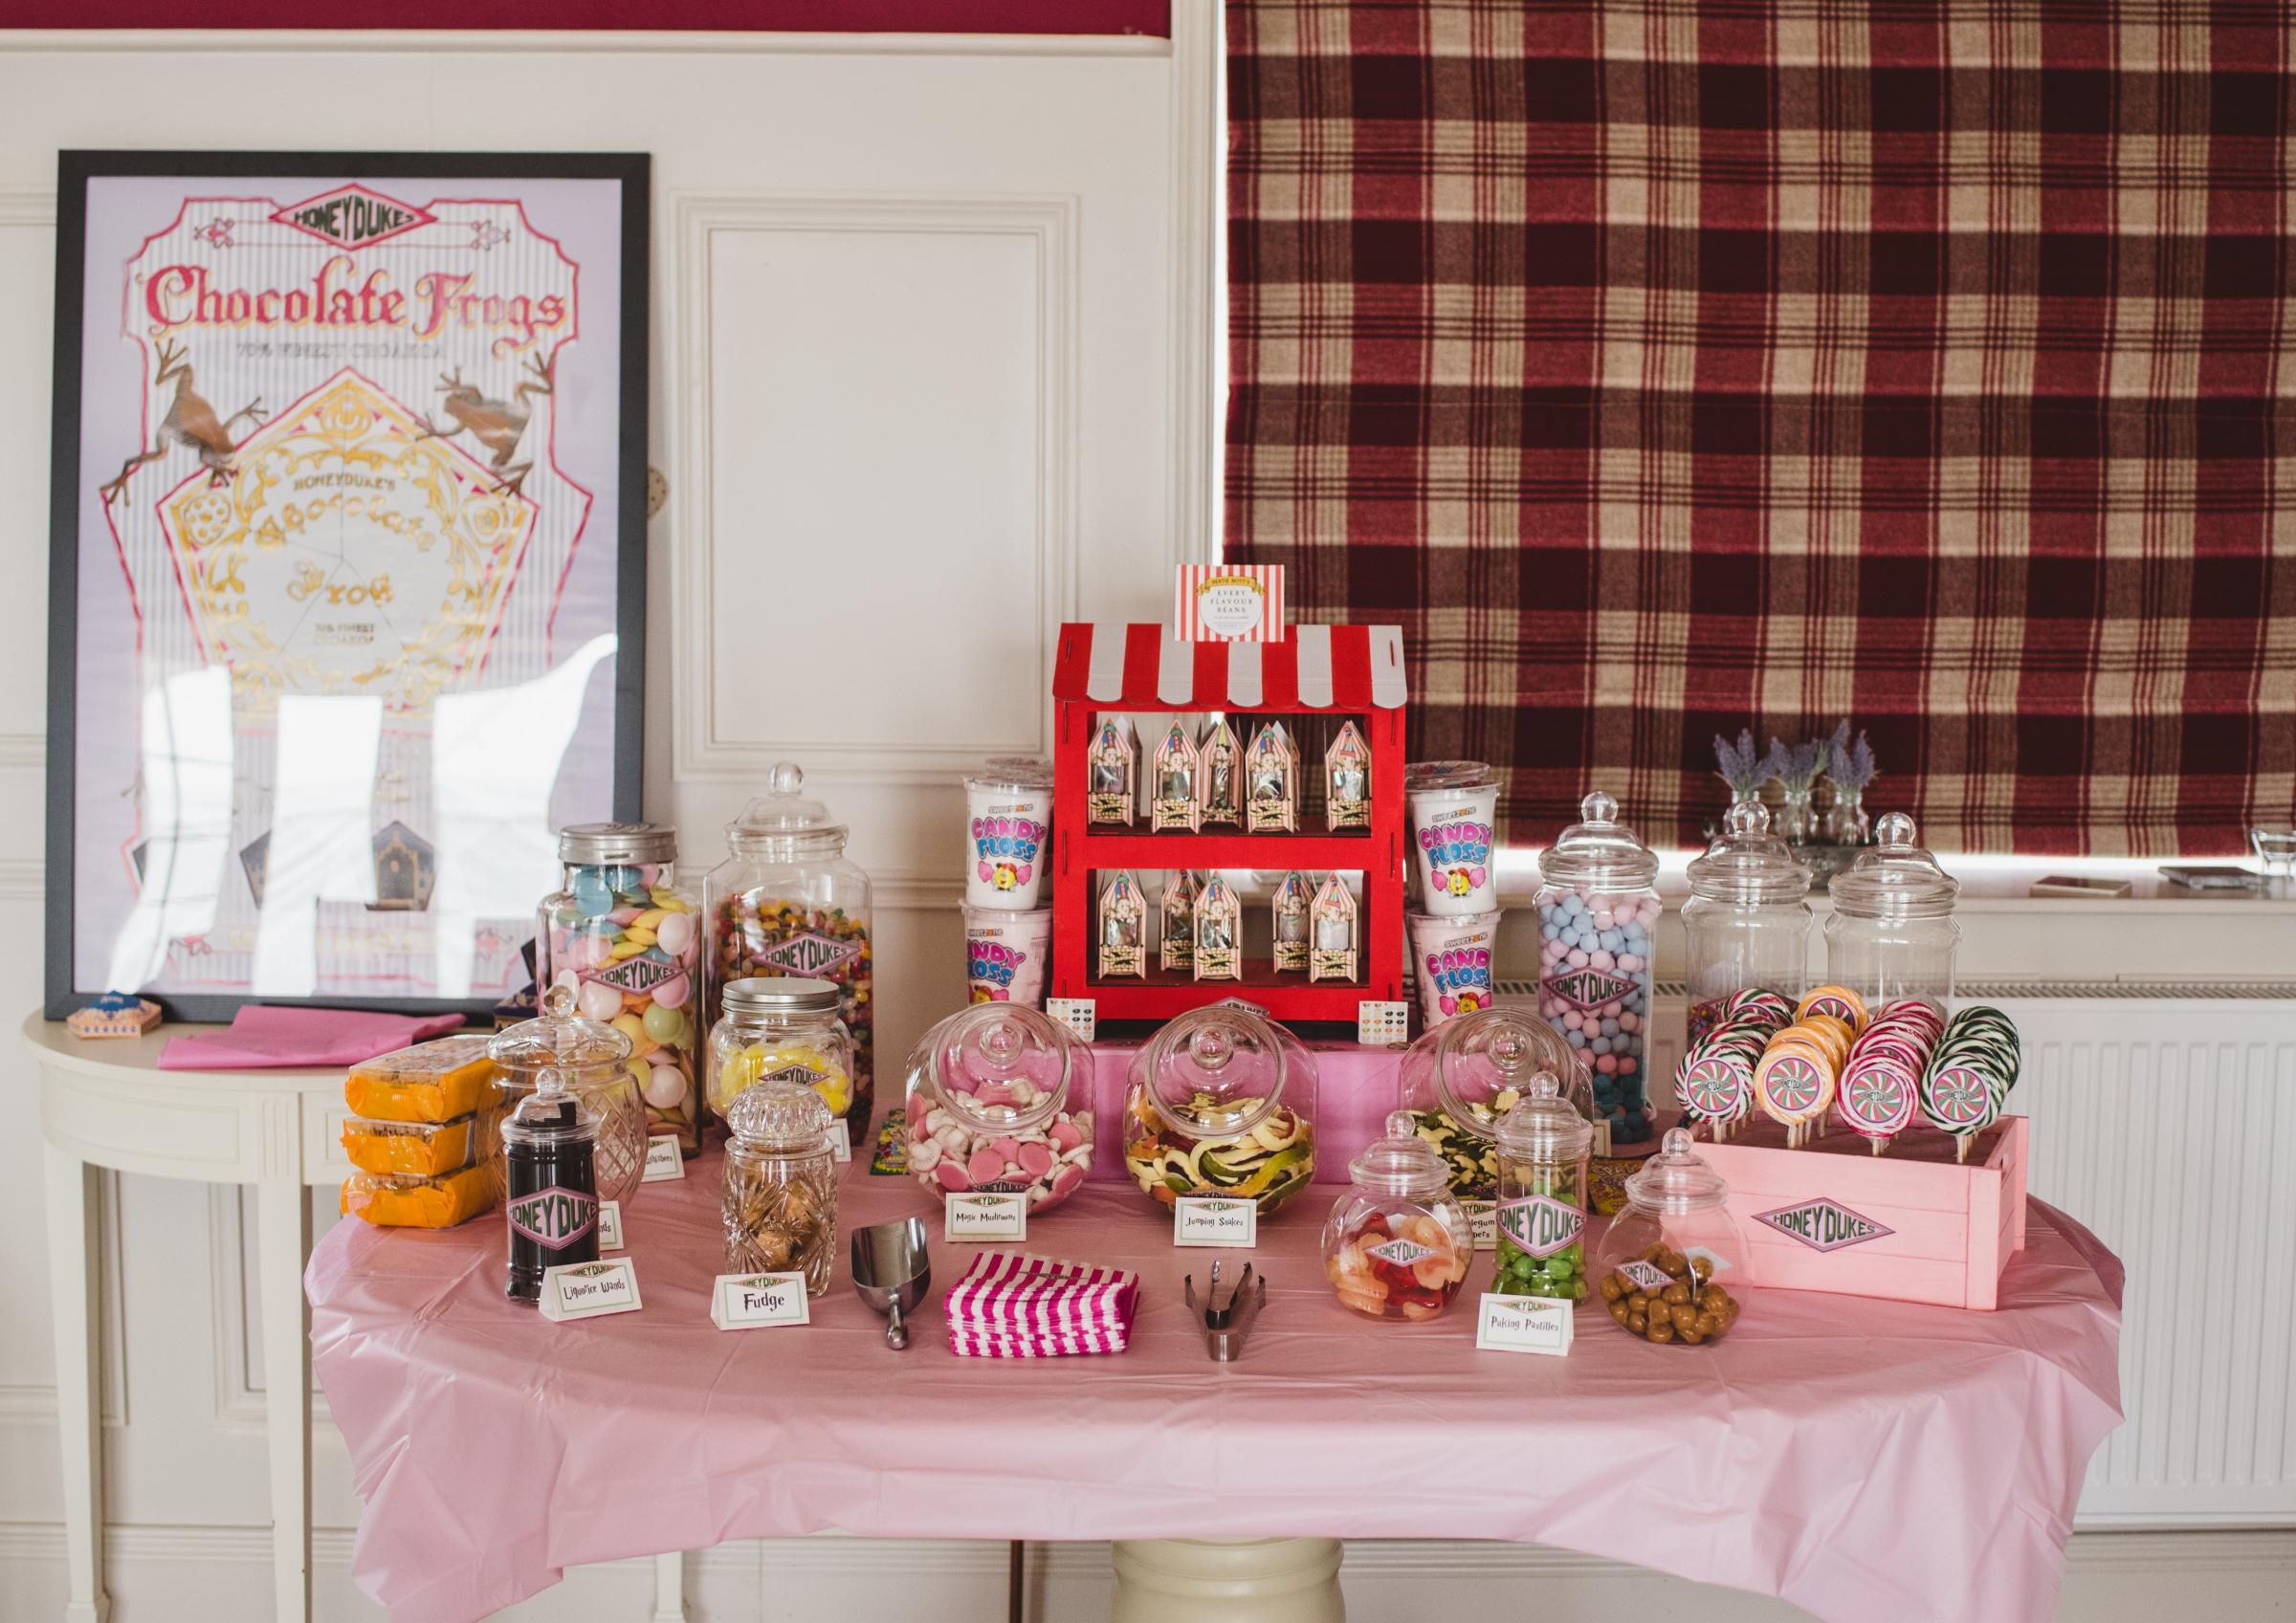 Lesa and Daniel had a sweet table for their guests inspired by Honeydukes sweet shop in Harry Potter. Photo: Erica Irvine.